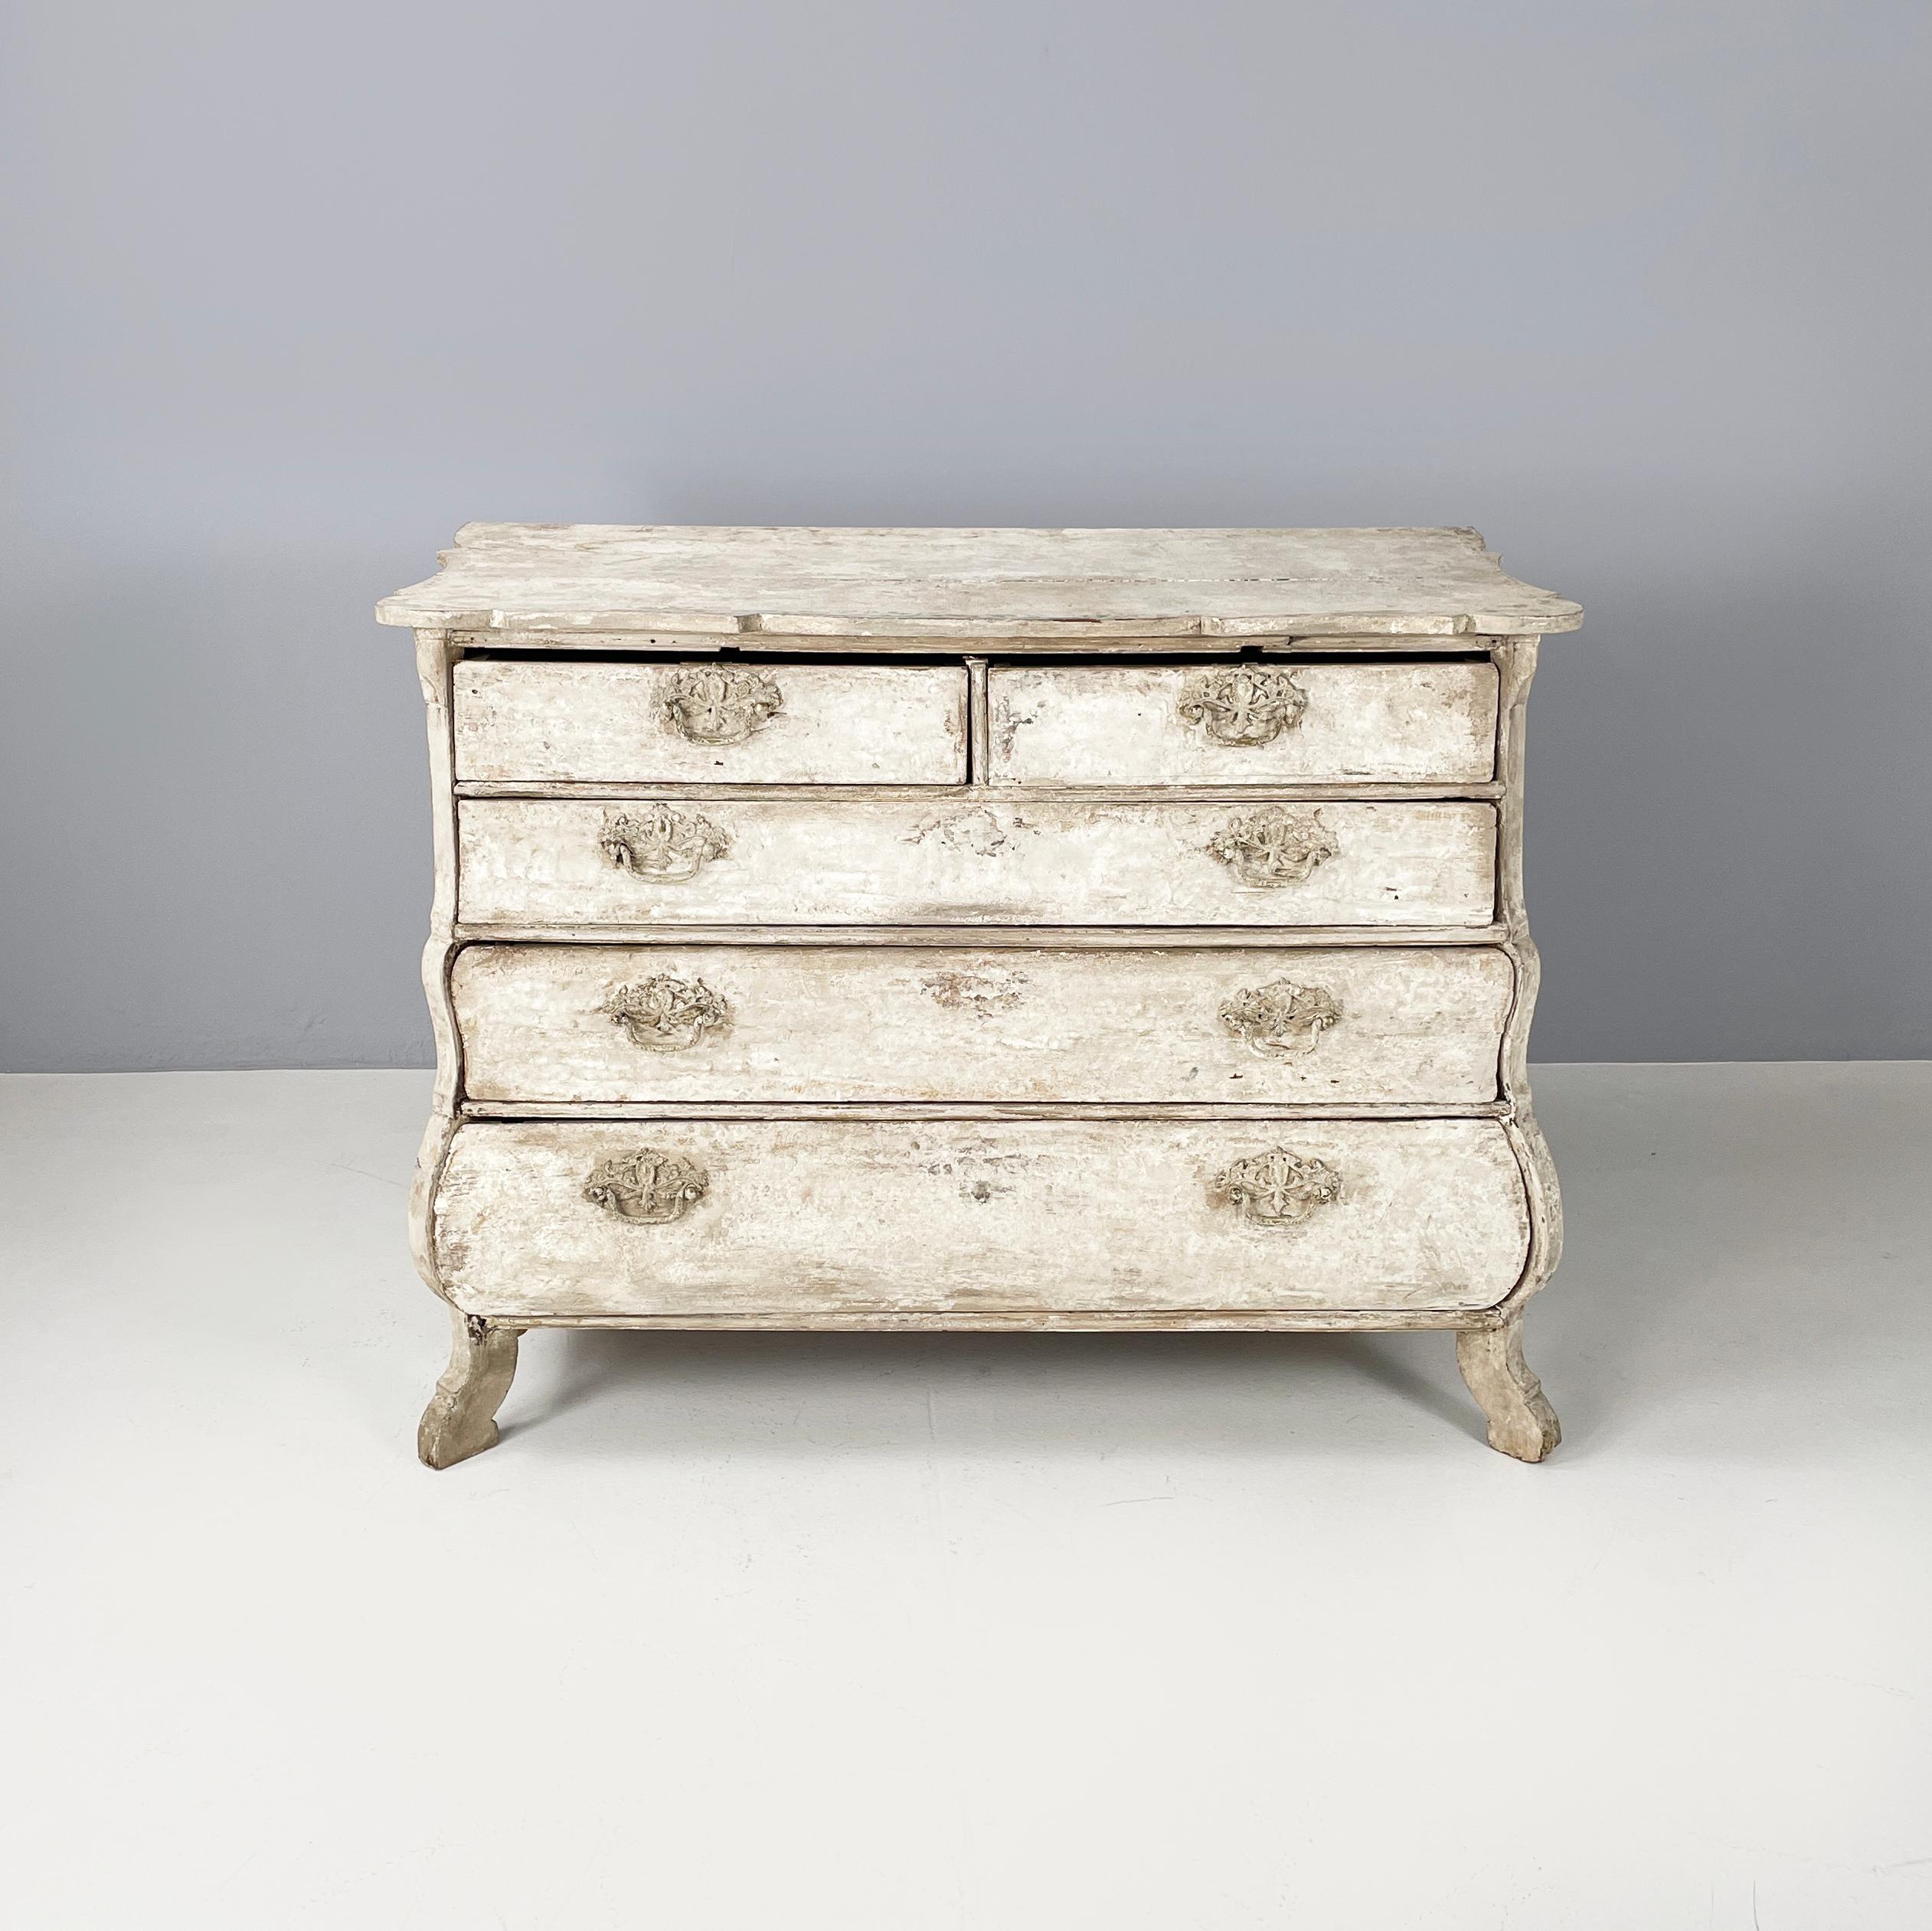 English Wooden chest of drawers with not-uniform white finish, 1700s
Wooden chest of drawers with a not-uniform white finish. The cantilevered top has a shaped profile. The front has a slight curvature. There are 2 small and 3 large drawers with